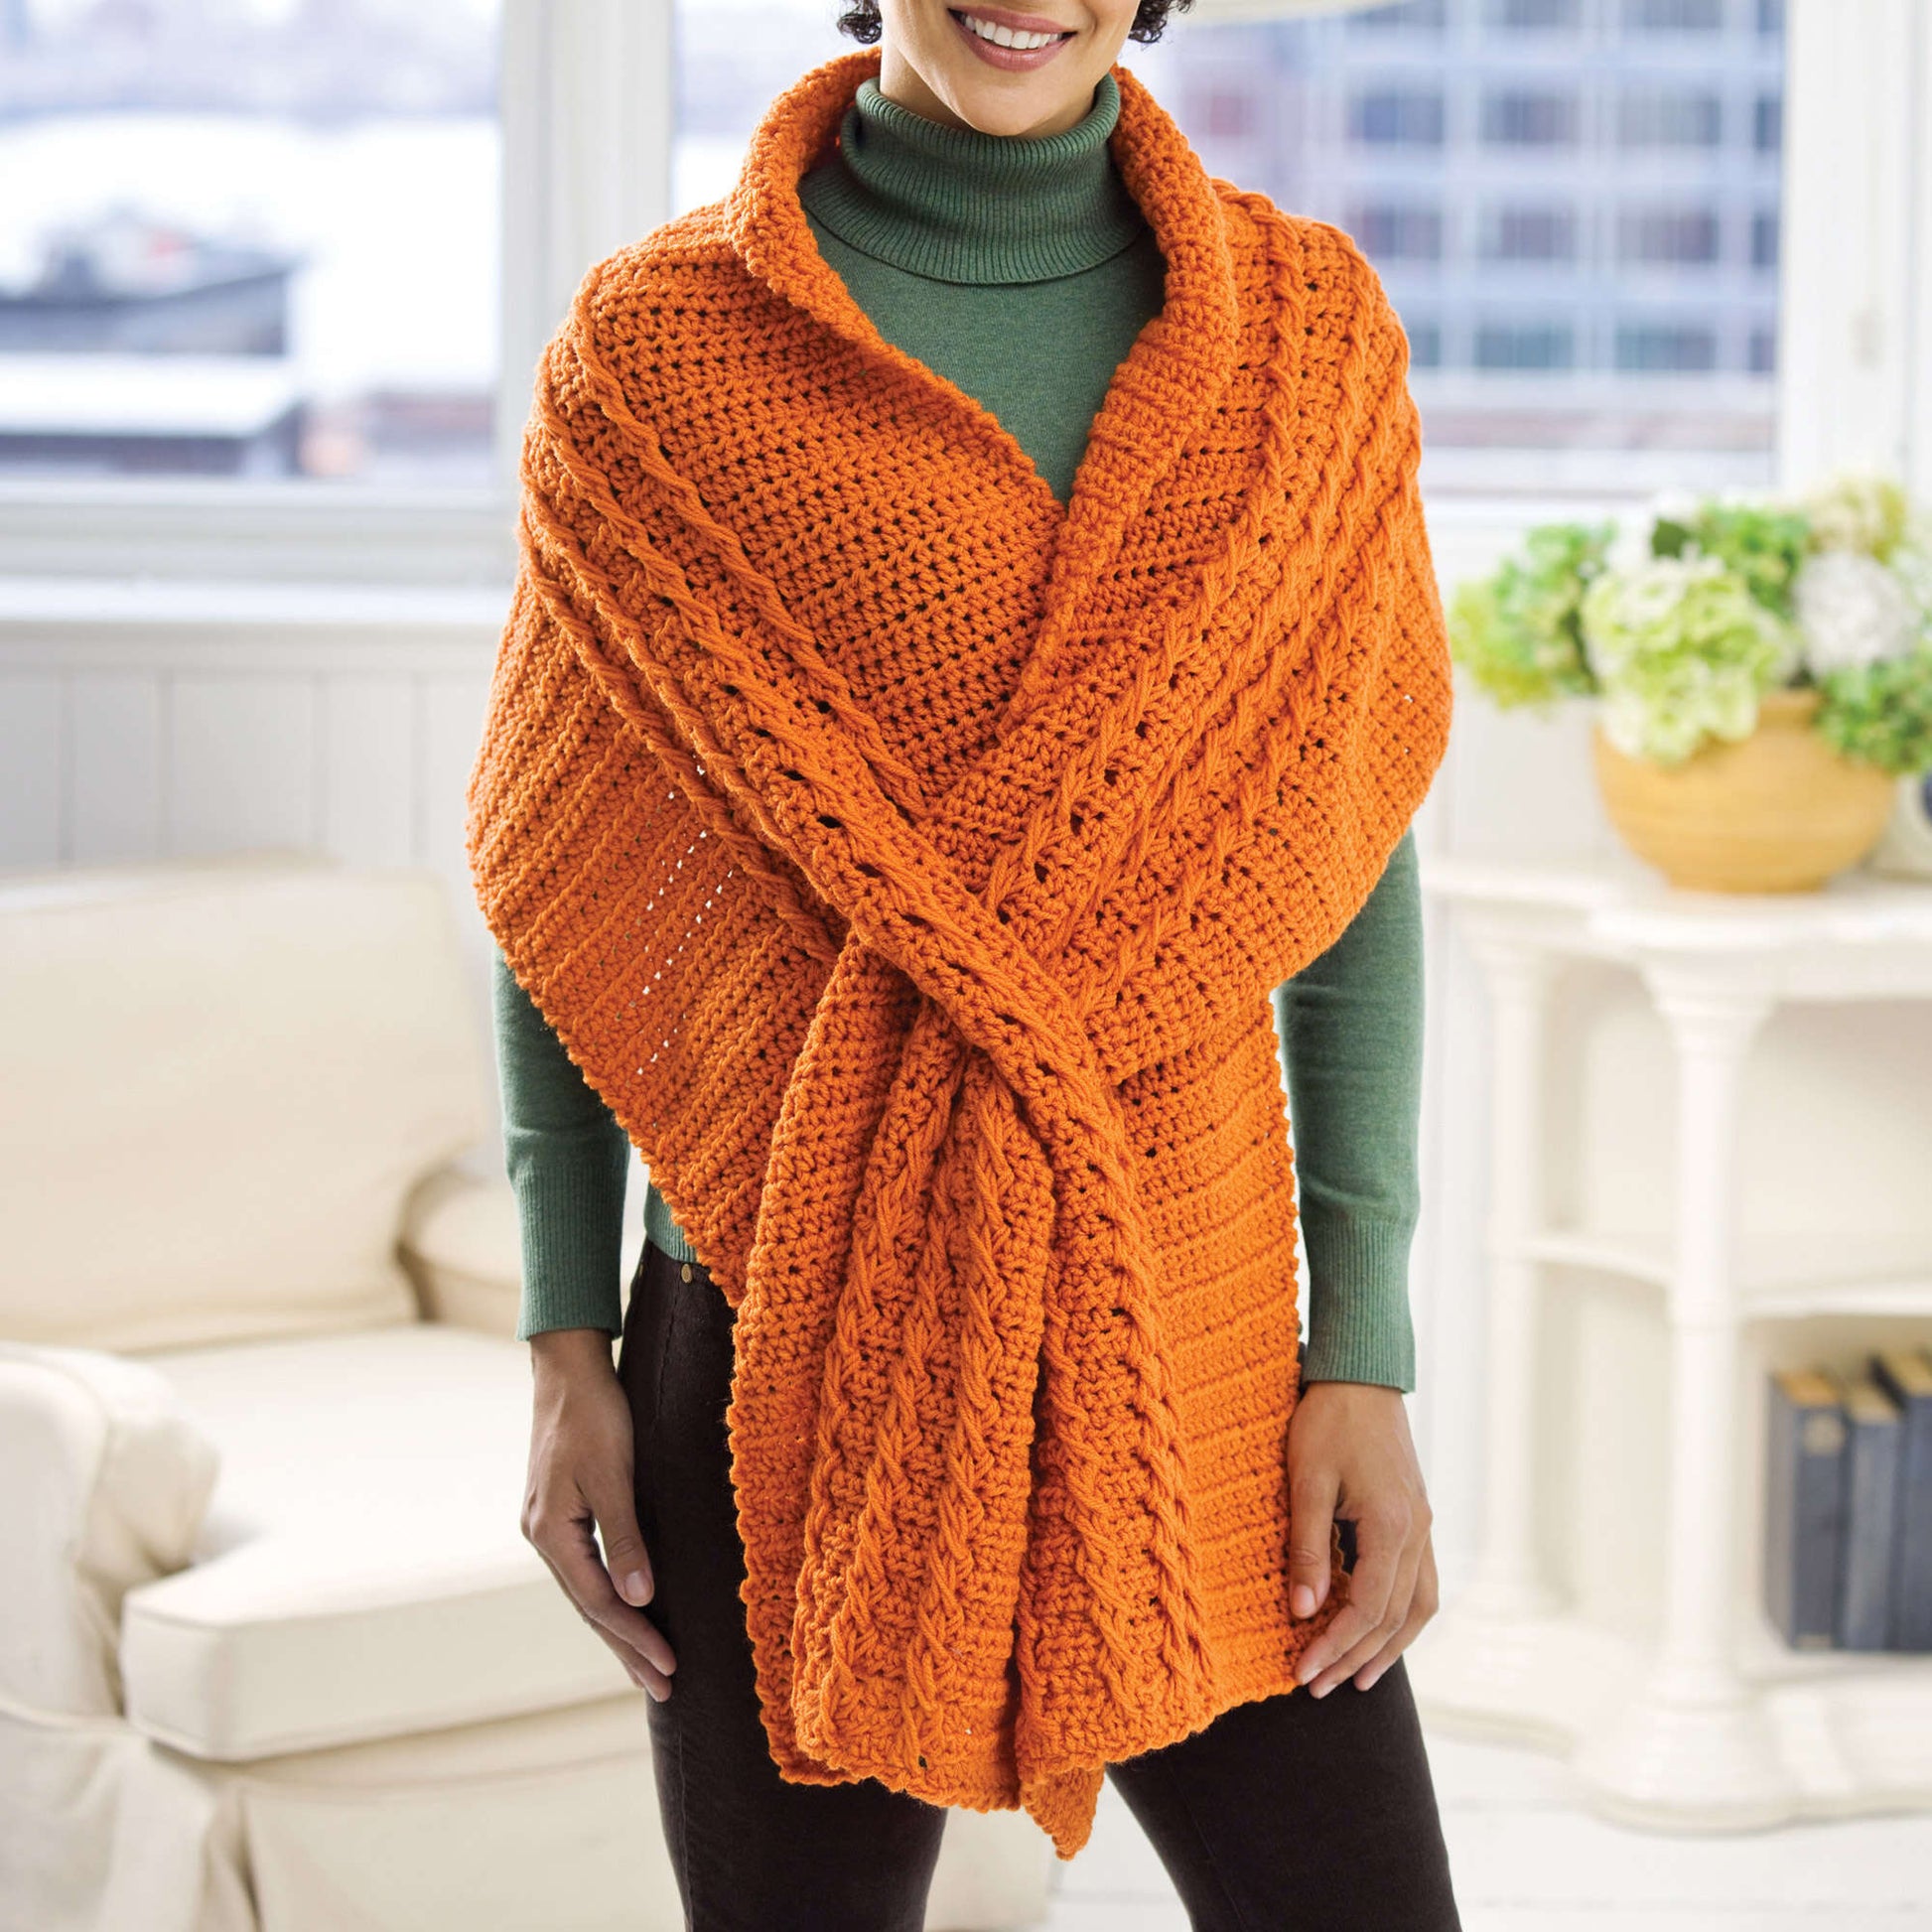 Free Red Heart Crochet Wrap With Slits Pattern